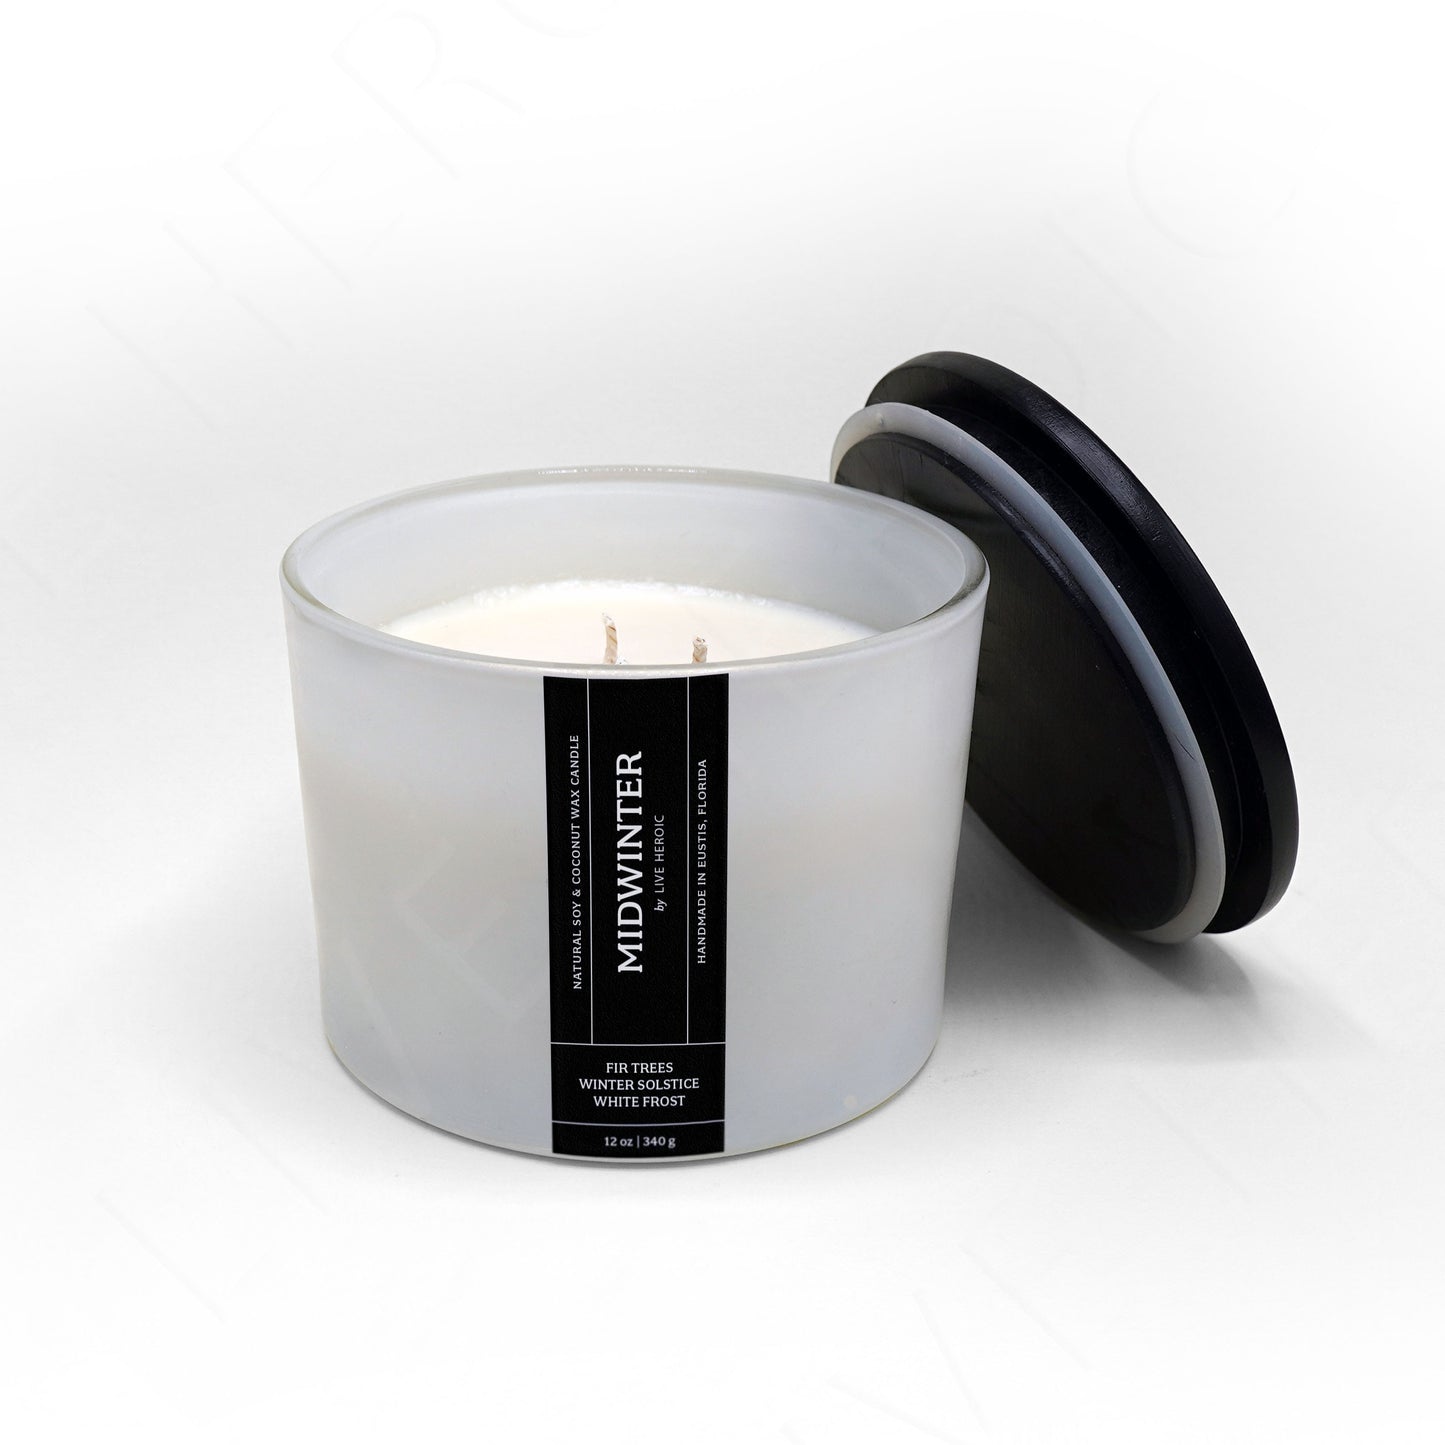 Midwinter | 12 oz Scented Coconut & Soy Wax Candle by Live Heroic